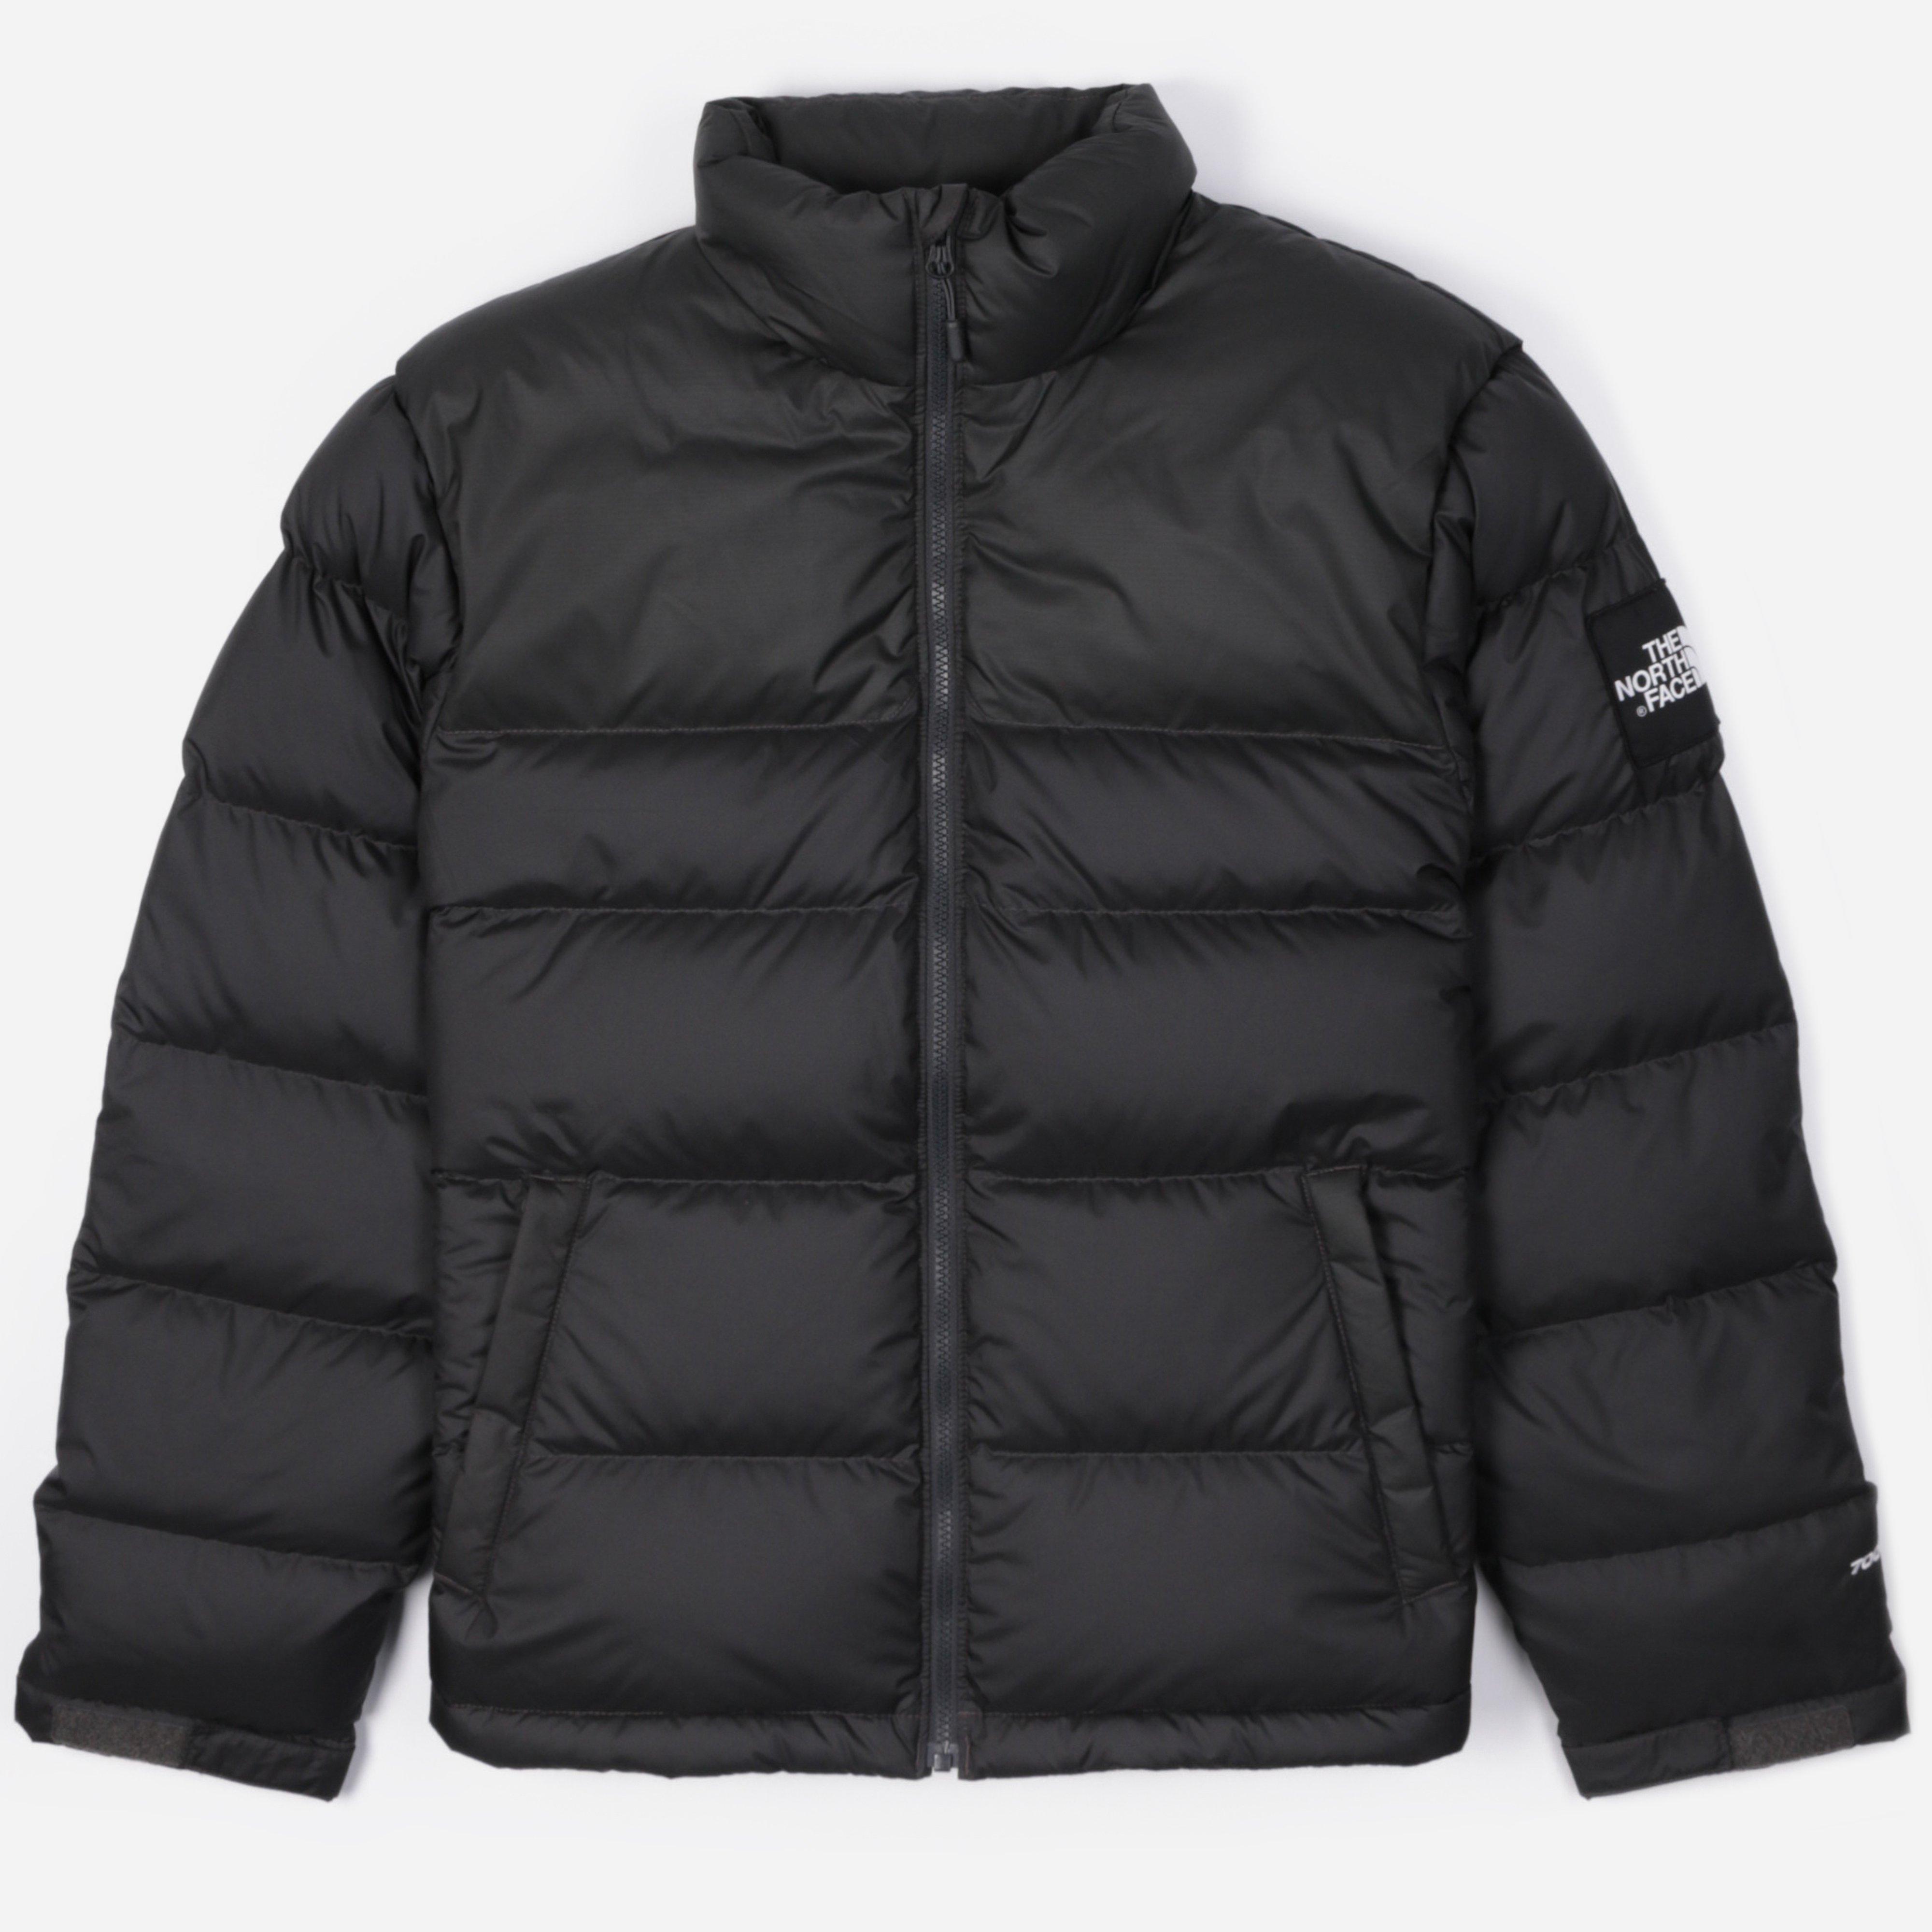 The North Face Synthetic 1992 Nuptse Jacket in Black for Men - Lyst